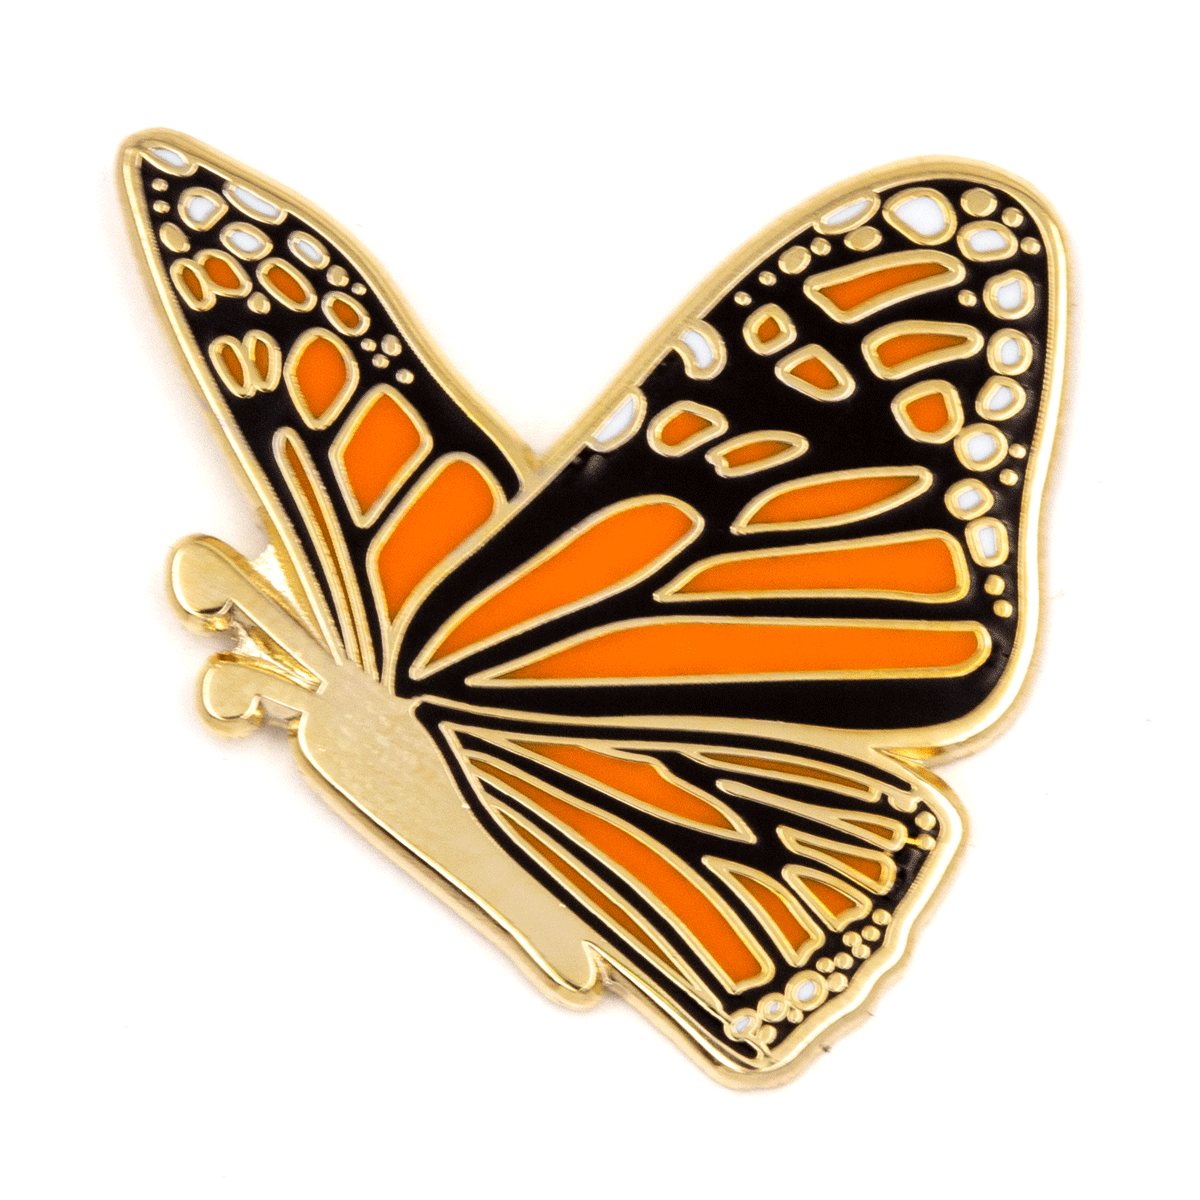 Monarch Butterfly Pin – These Are Things